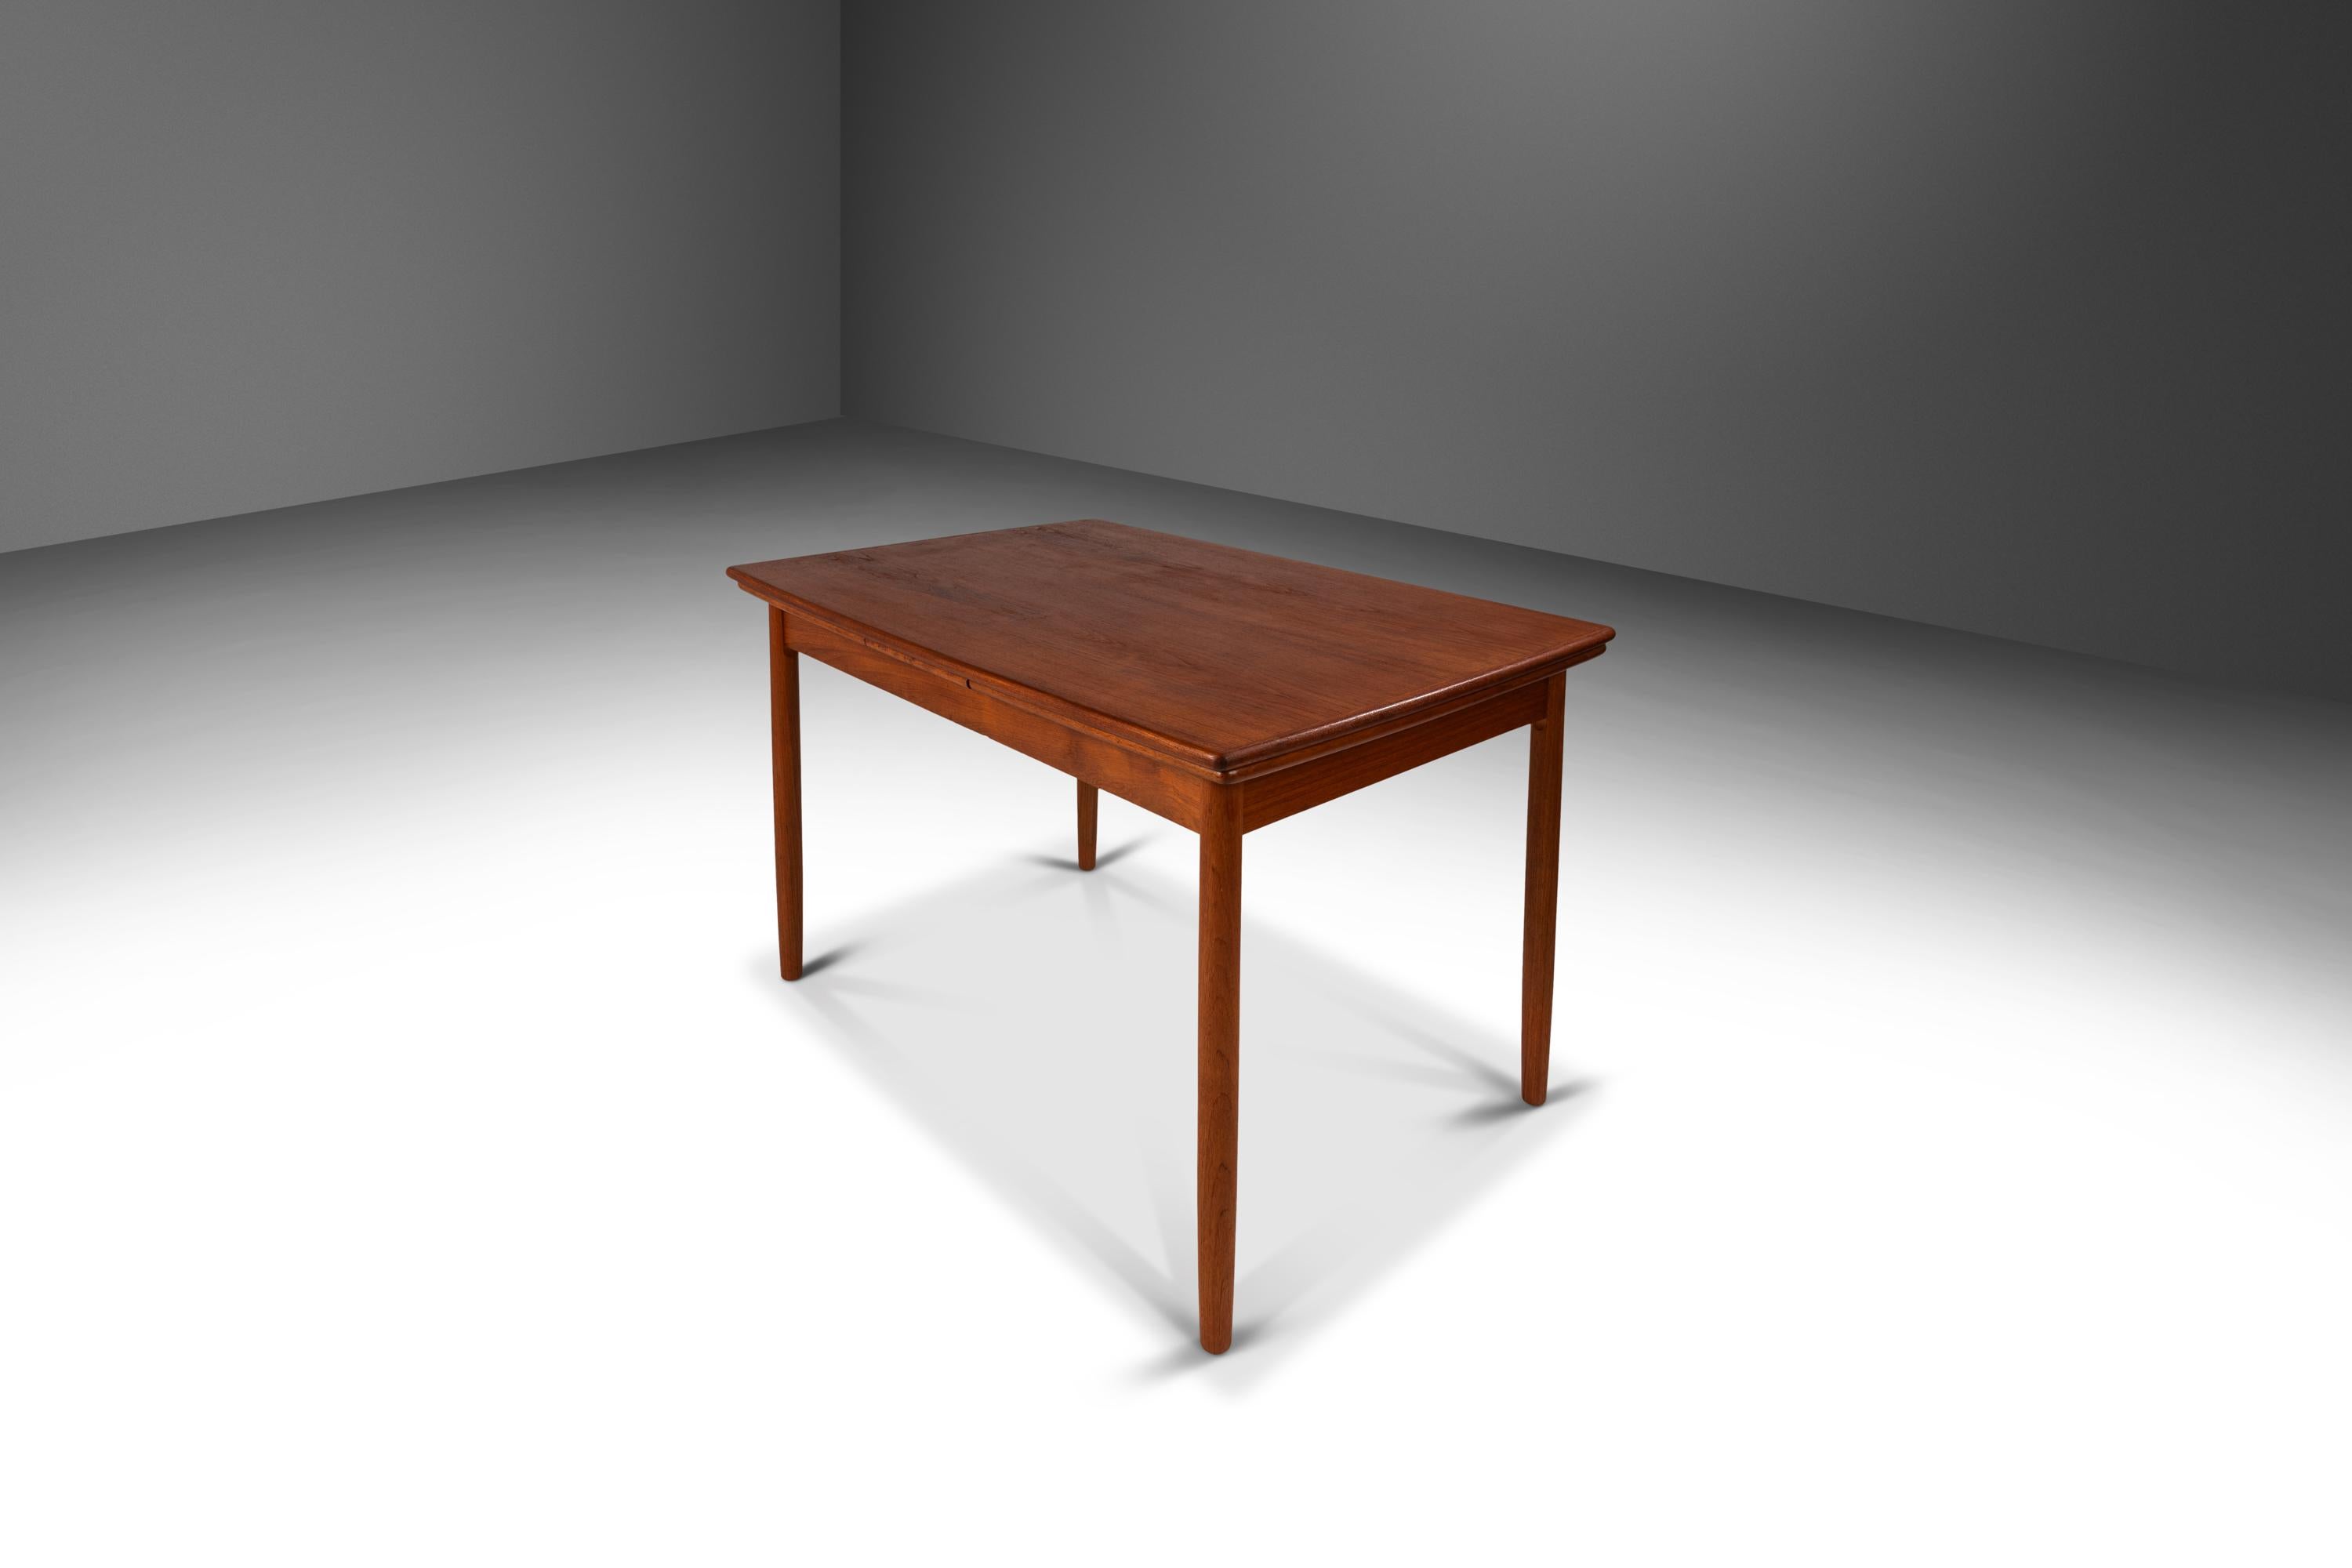 Introducing a highly functional, Danish-made expansion dining table built from a mix of solid and veneered Burmese teak with exceptional old-growth woodgrains throughout. True to the Danish Modern method this extraordinary piece is as practical as